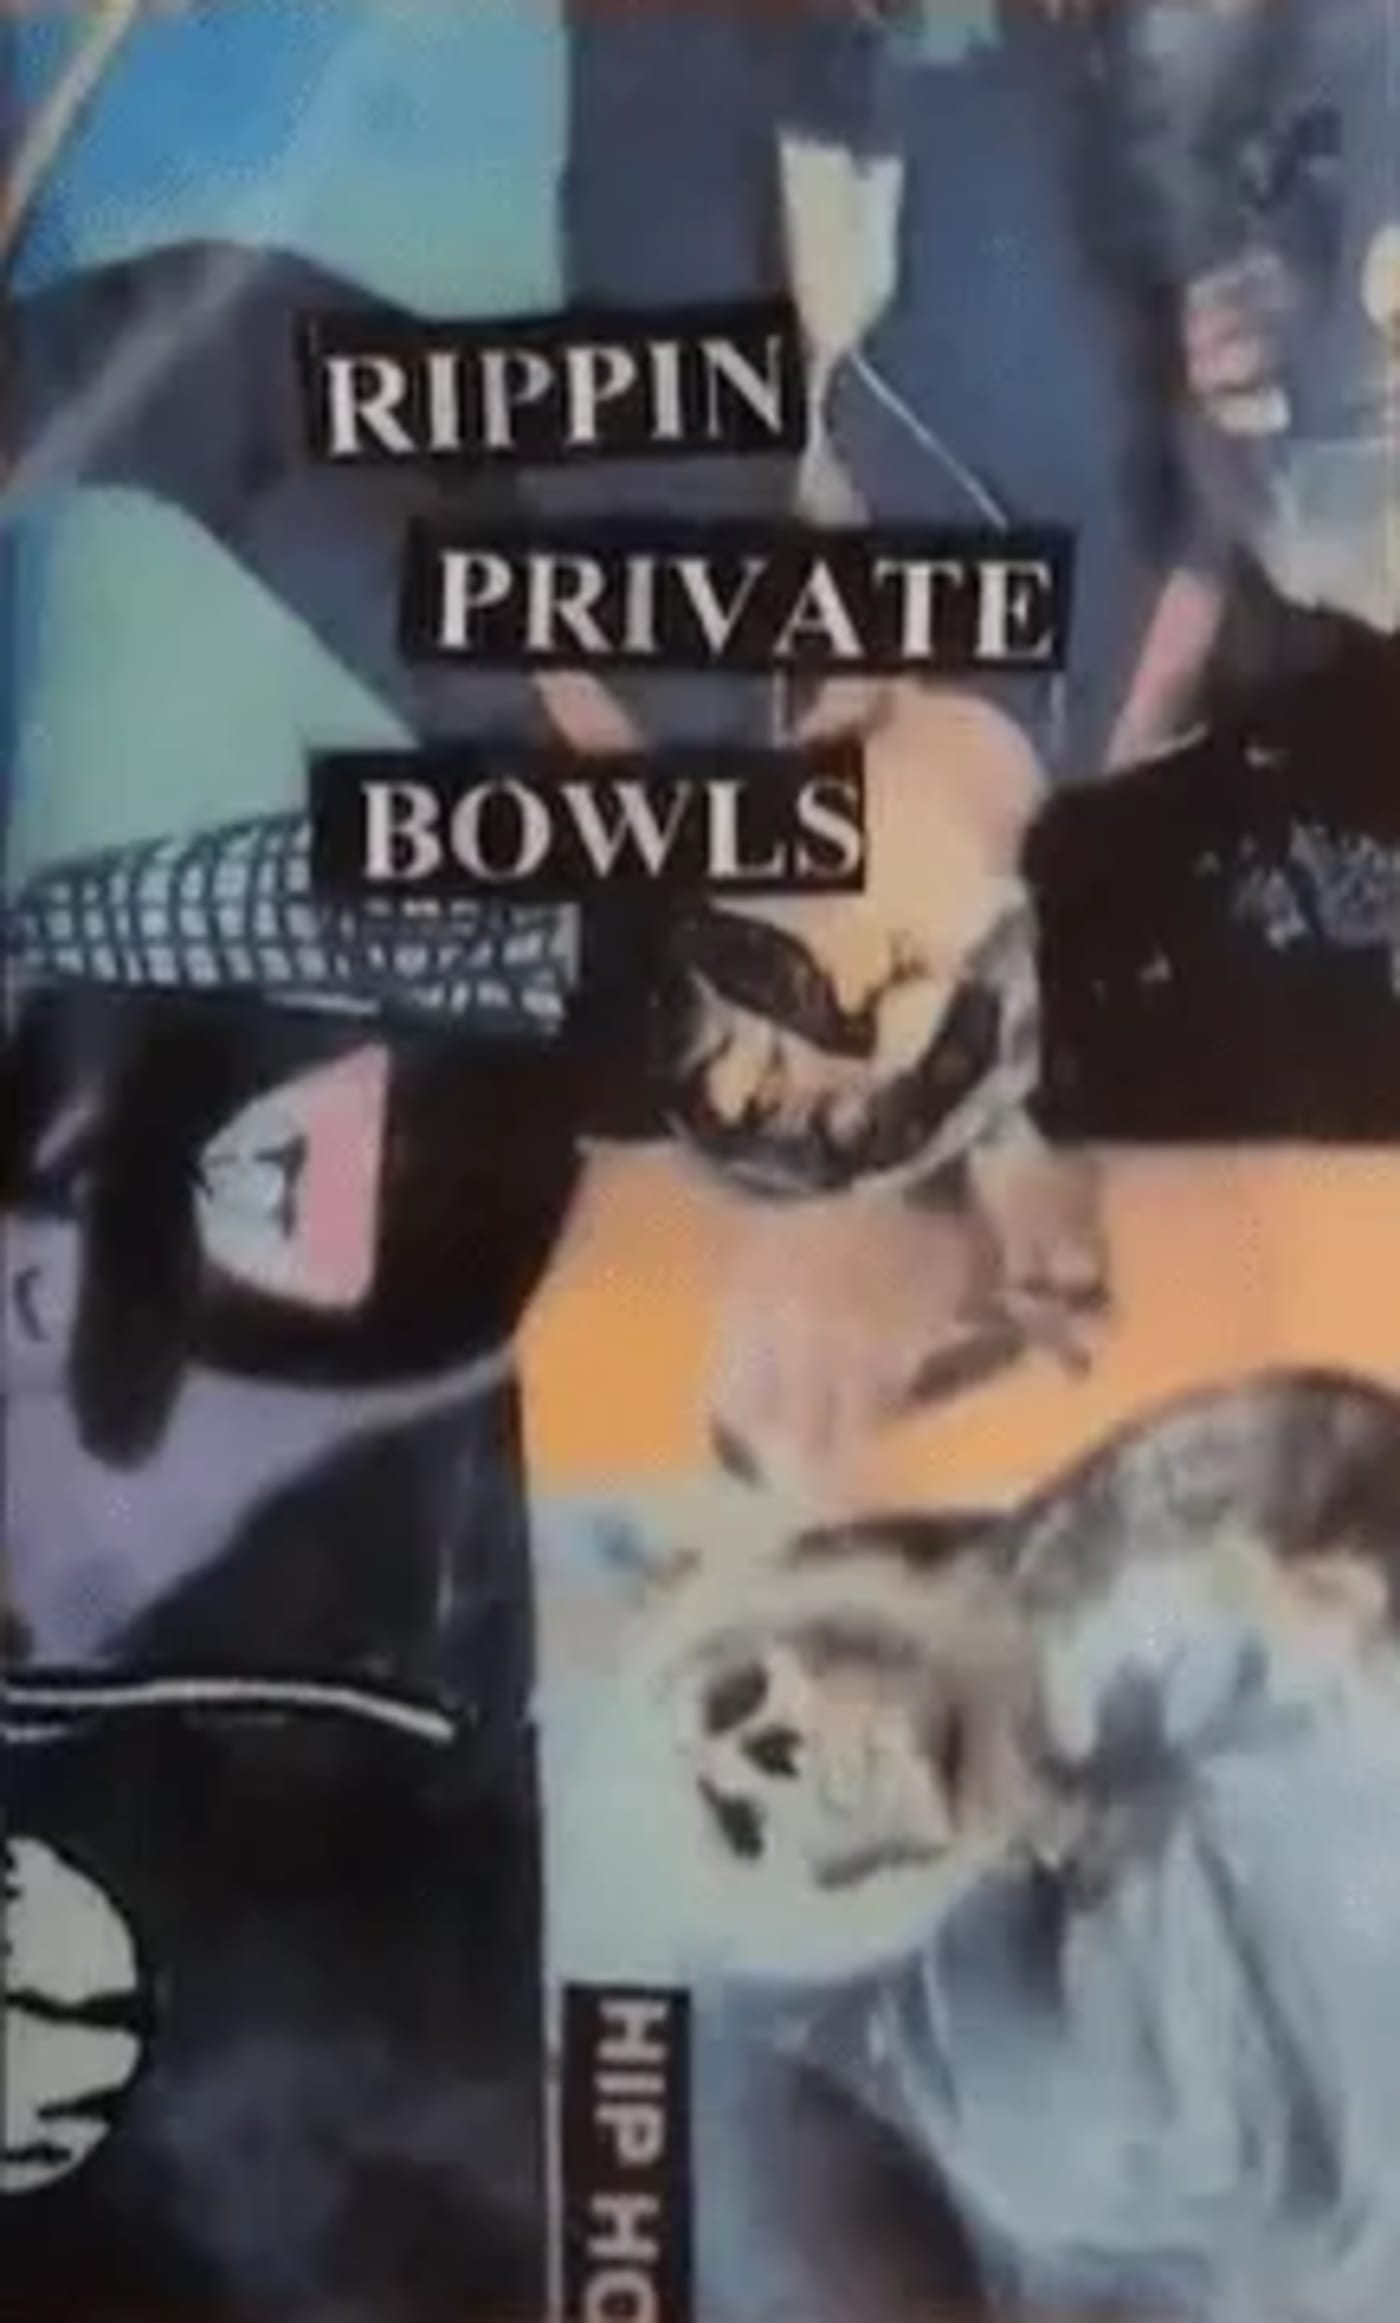 RIPPING PRIVATE BOWLS